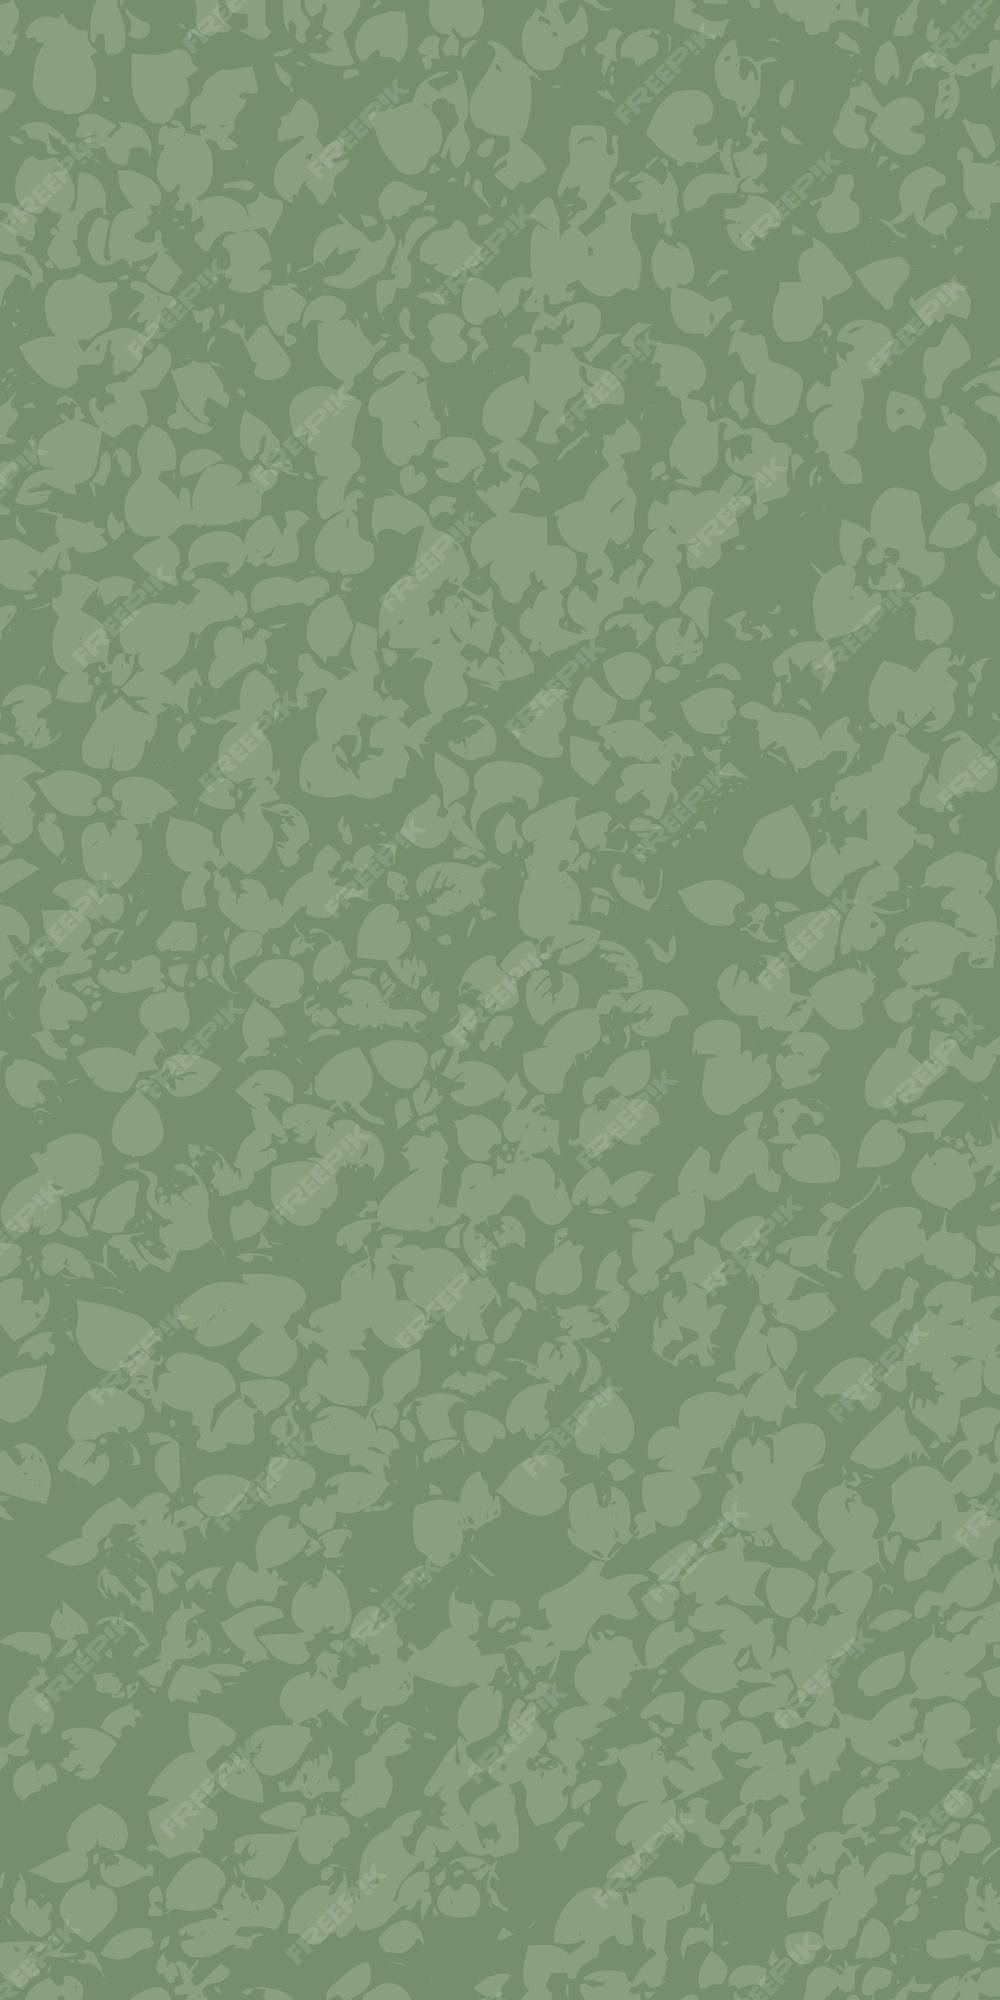 Premium Vector. Abstract vertical green background with grain texture light green seeds on a darker background